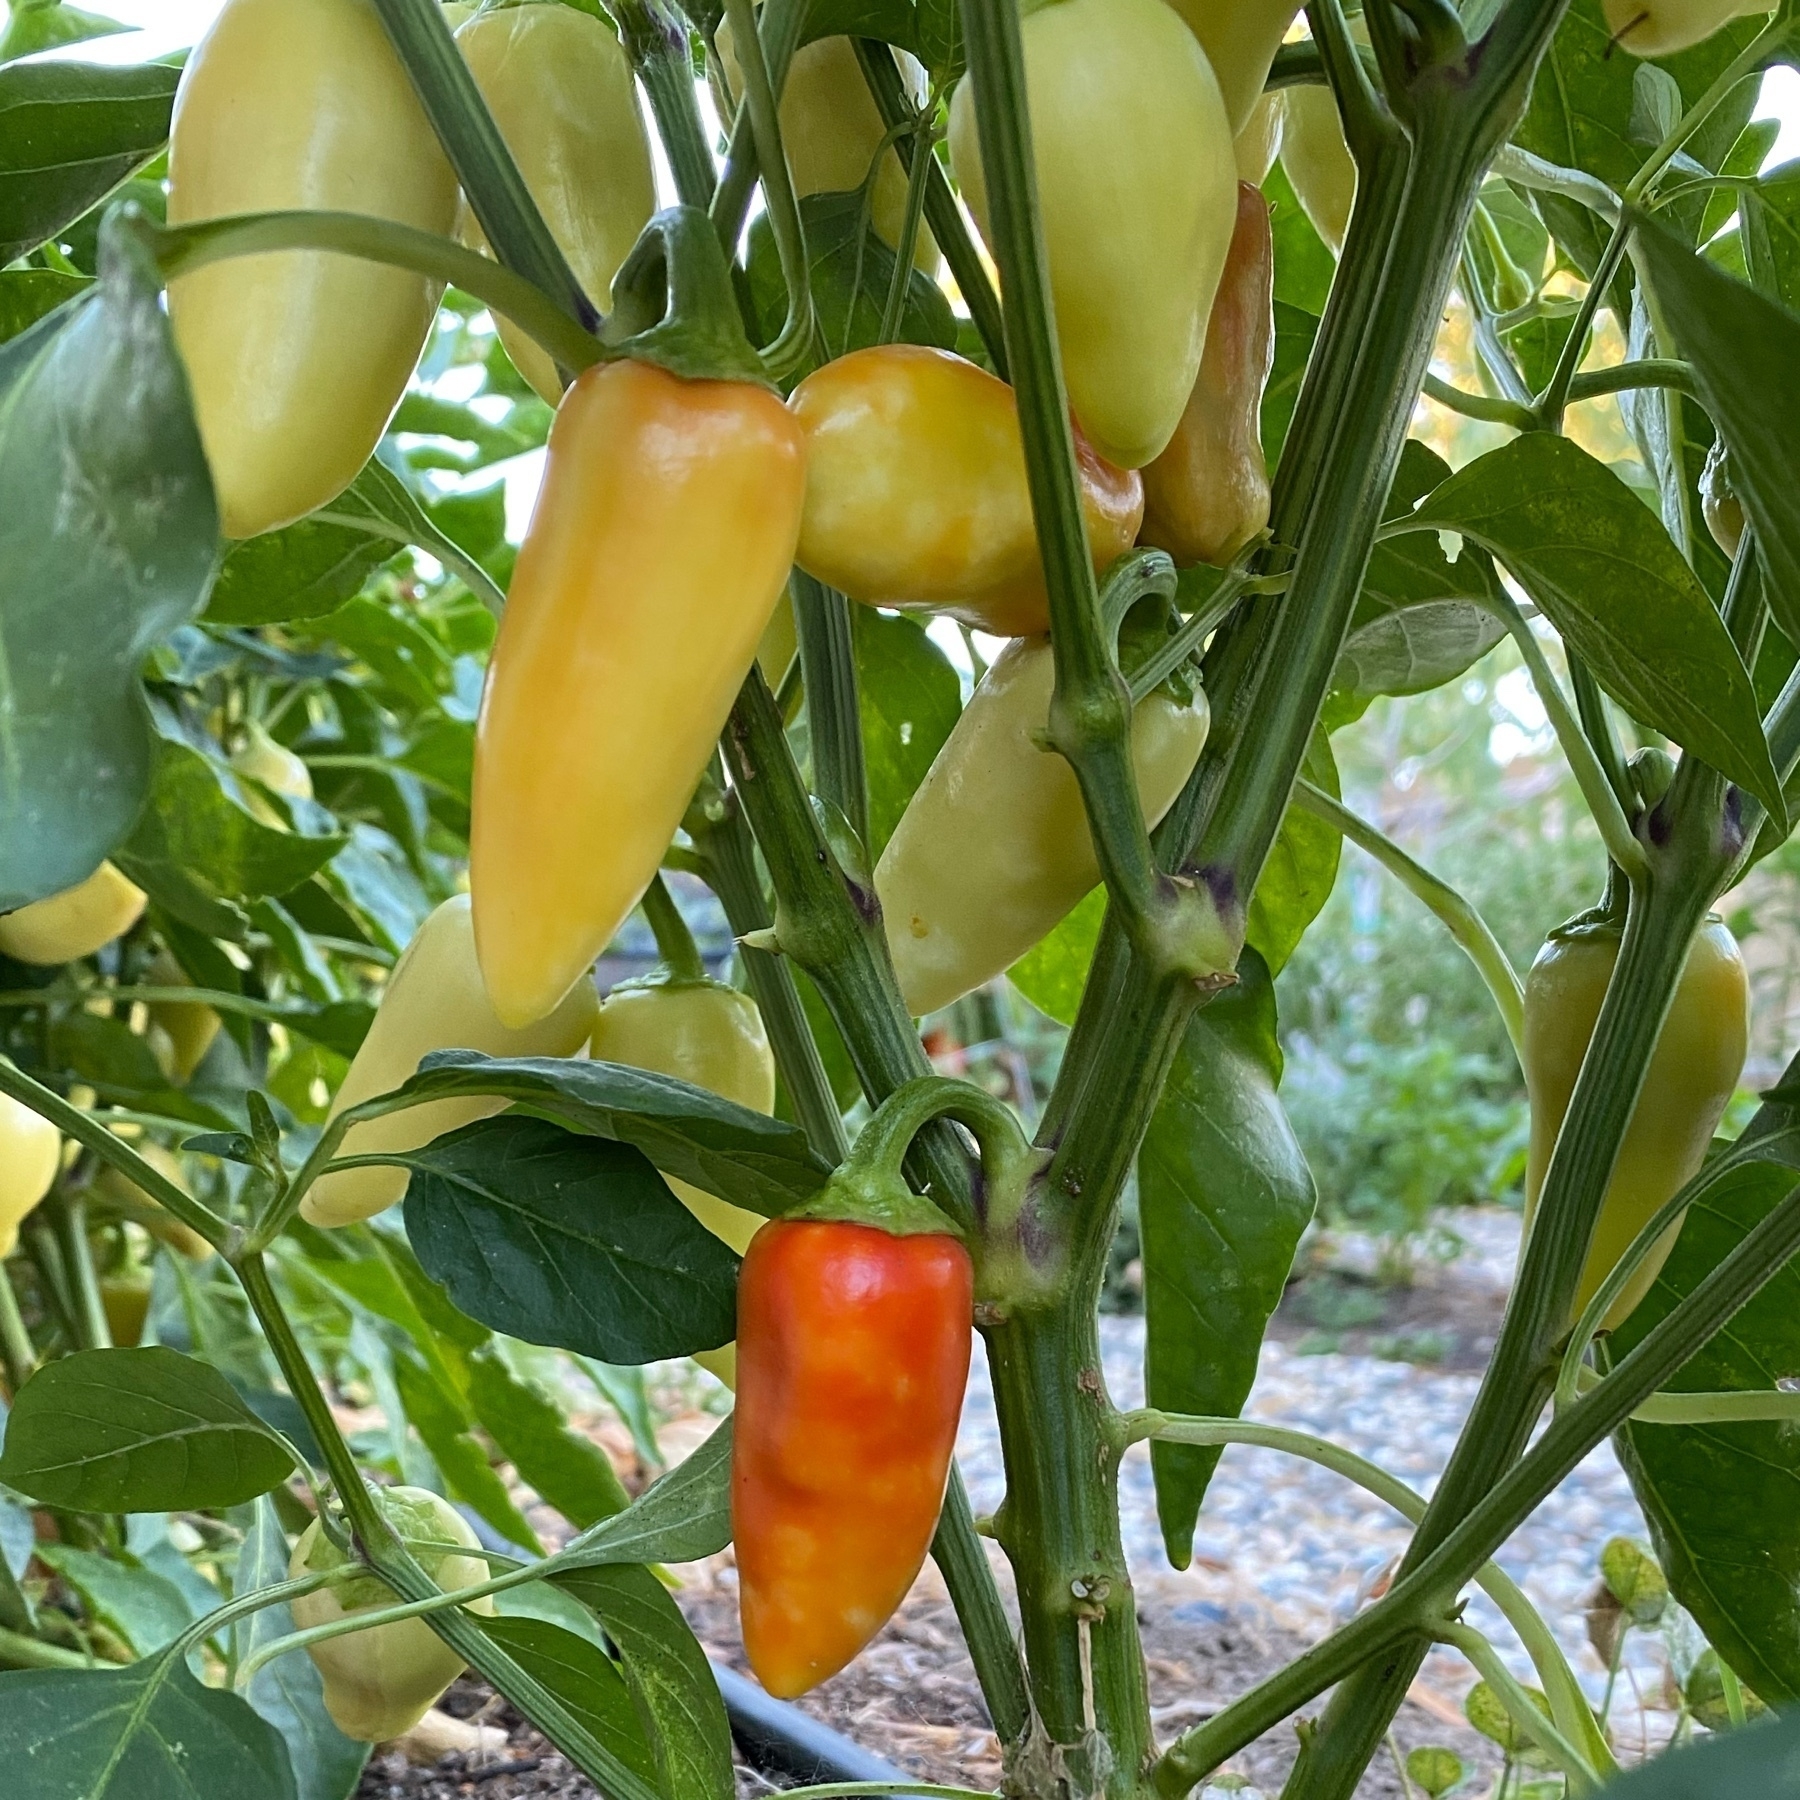 Santa Fe peppers ripening, red and yellow agains the leaves